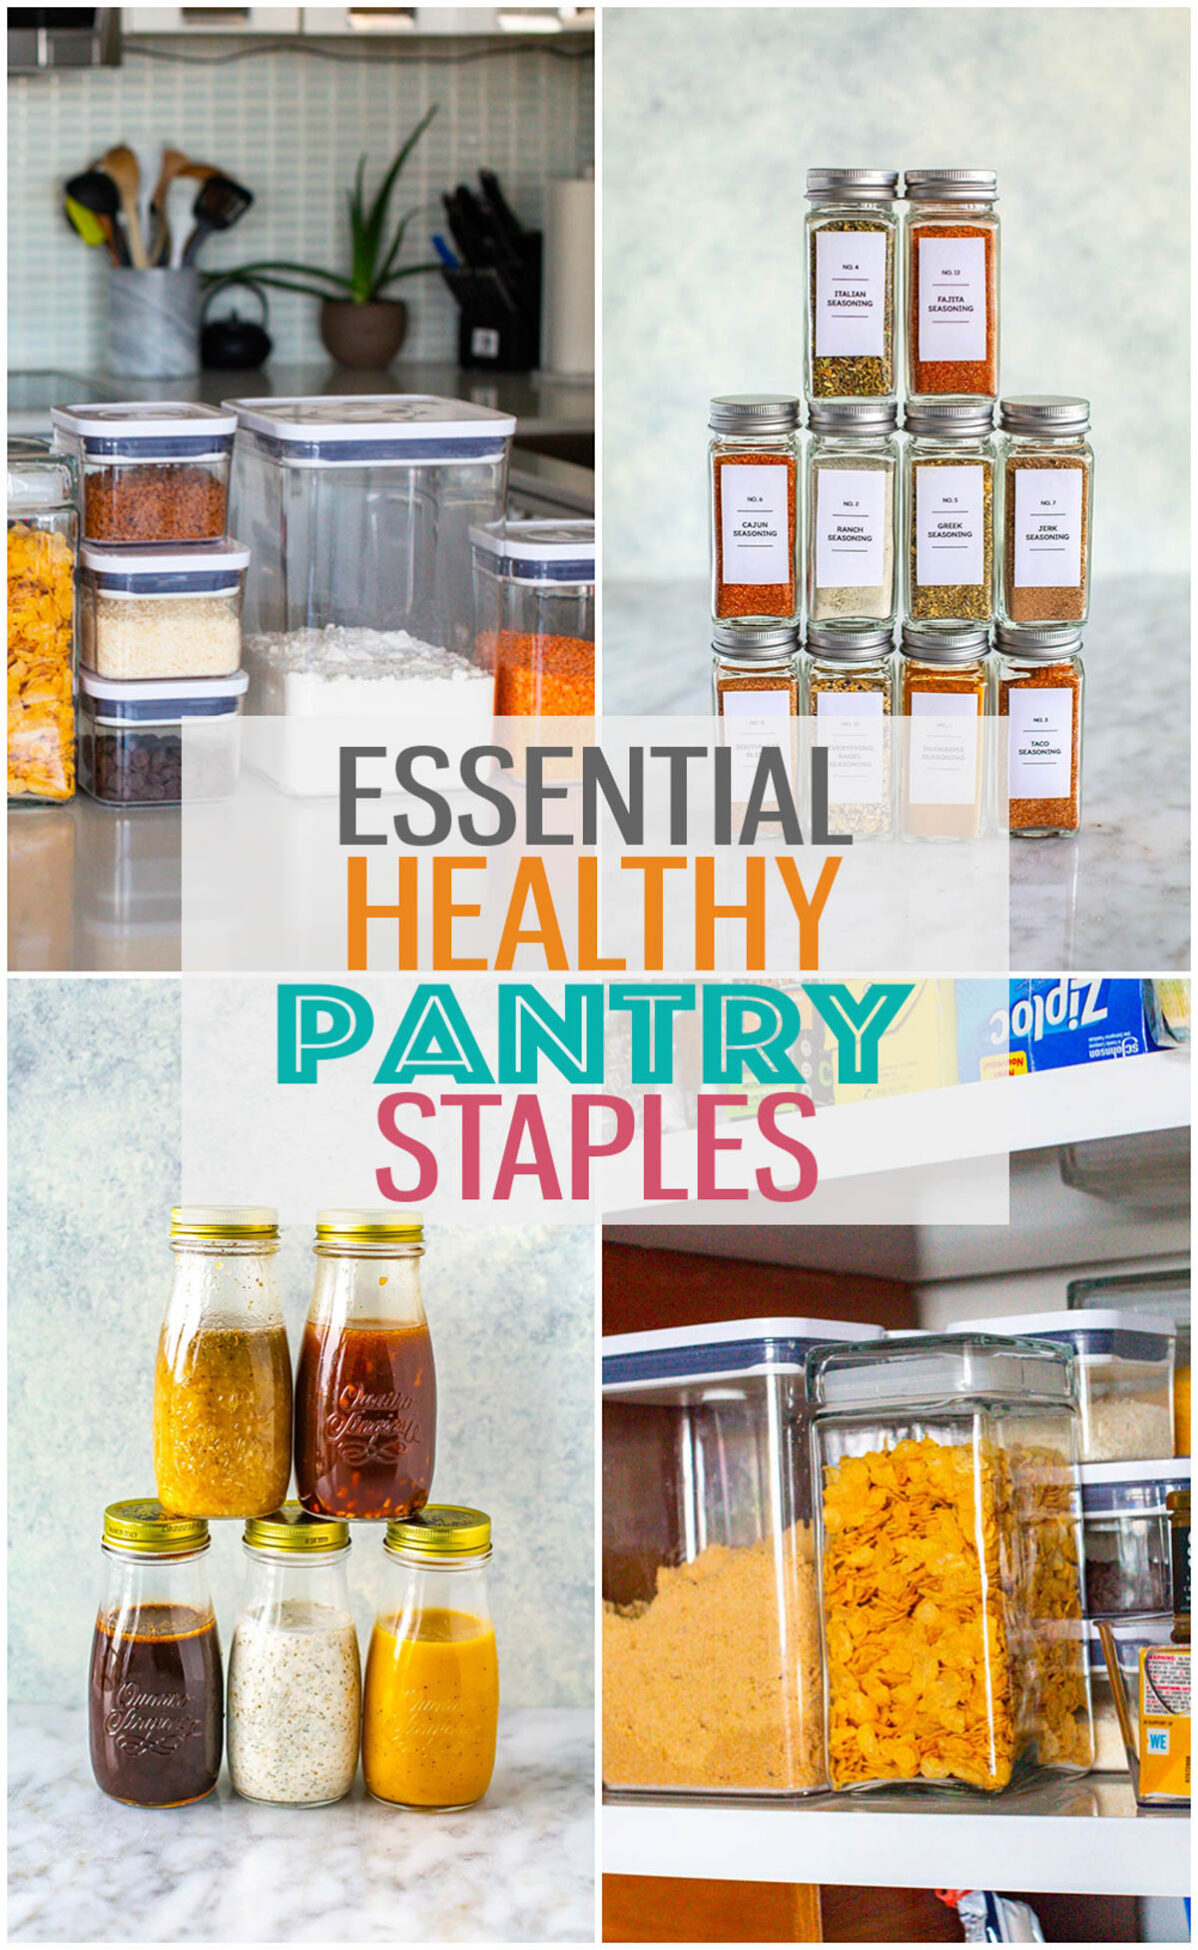 A collage of different pantry staples with the text "Essential Healthy Pantry Staples" layered over top.